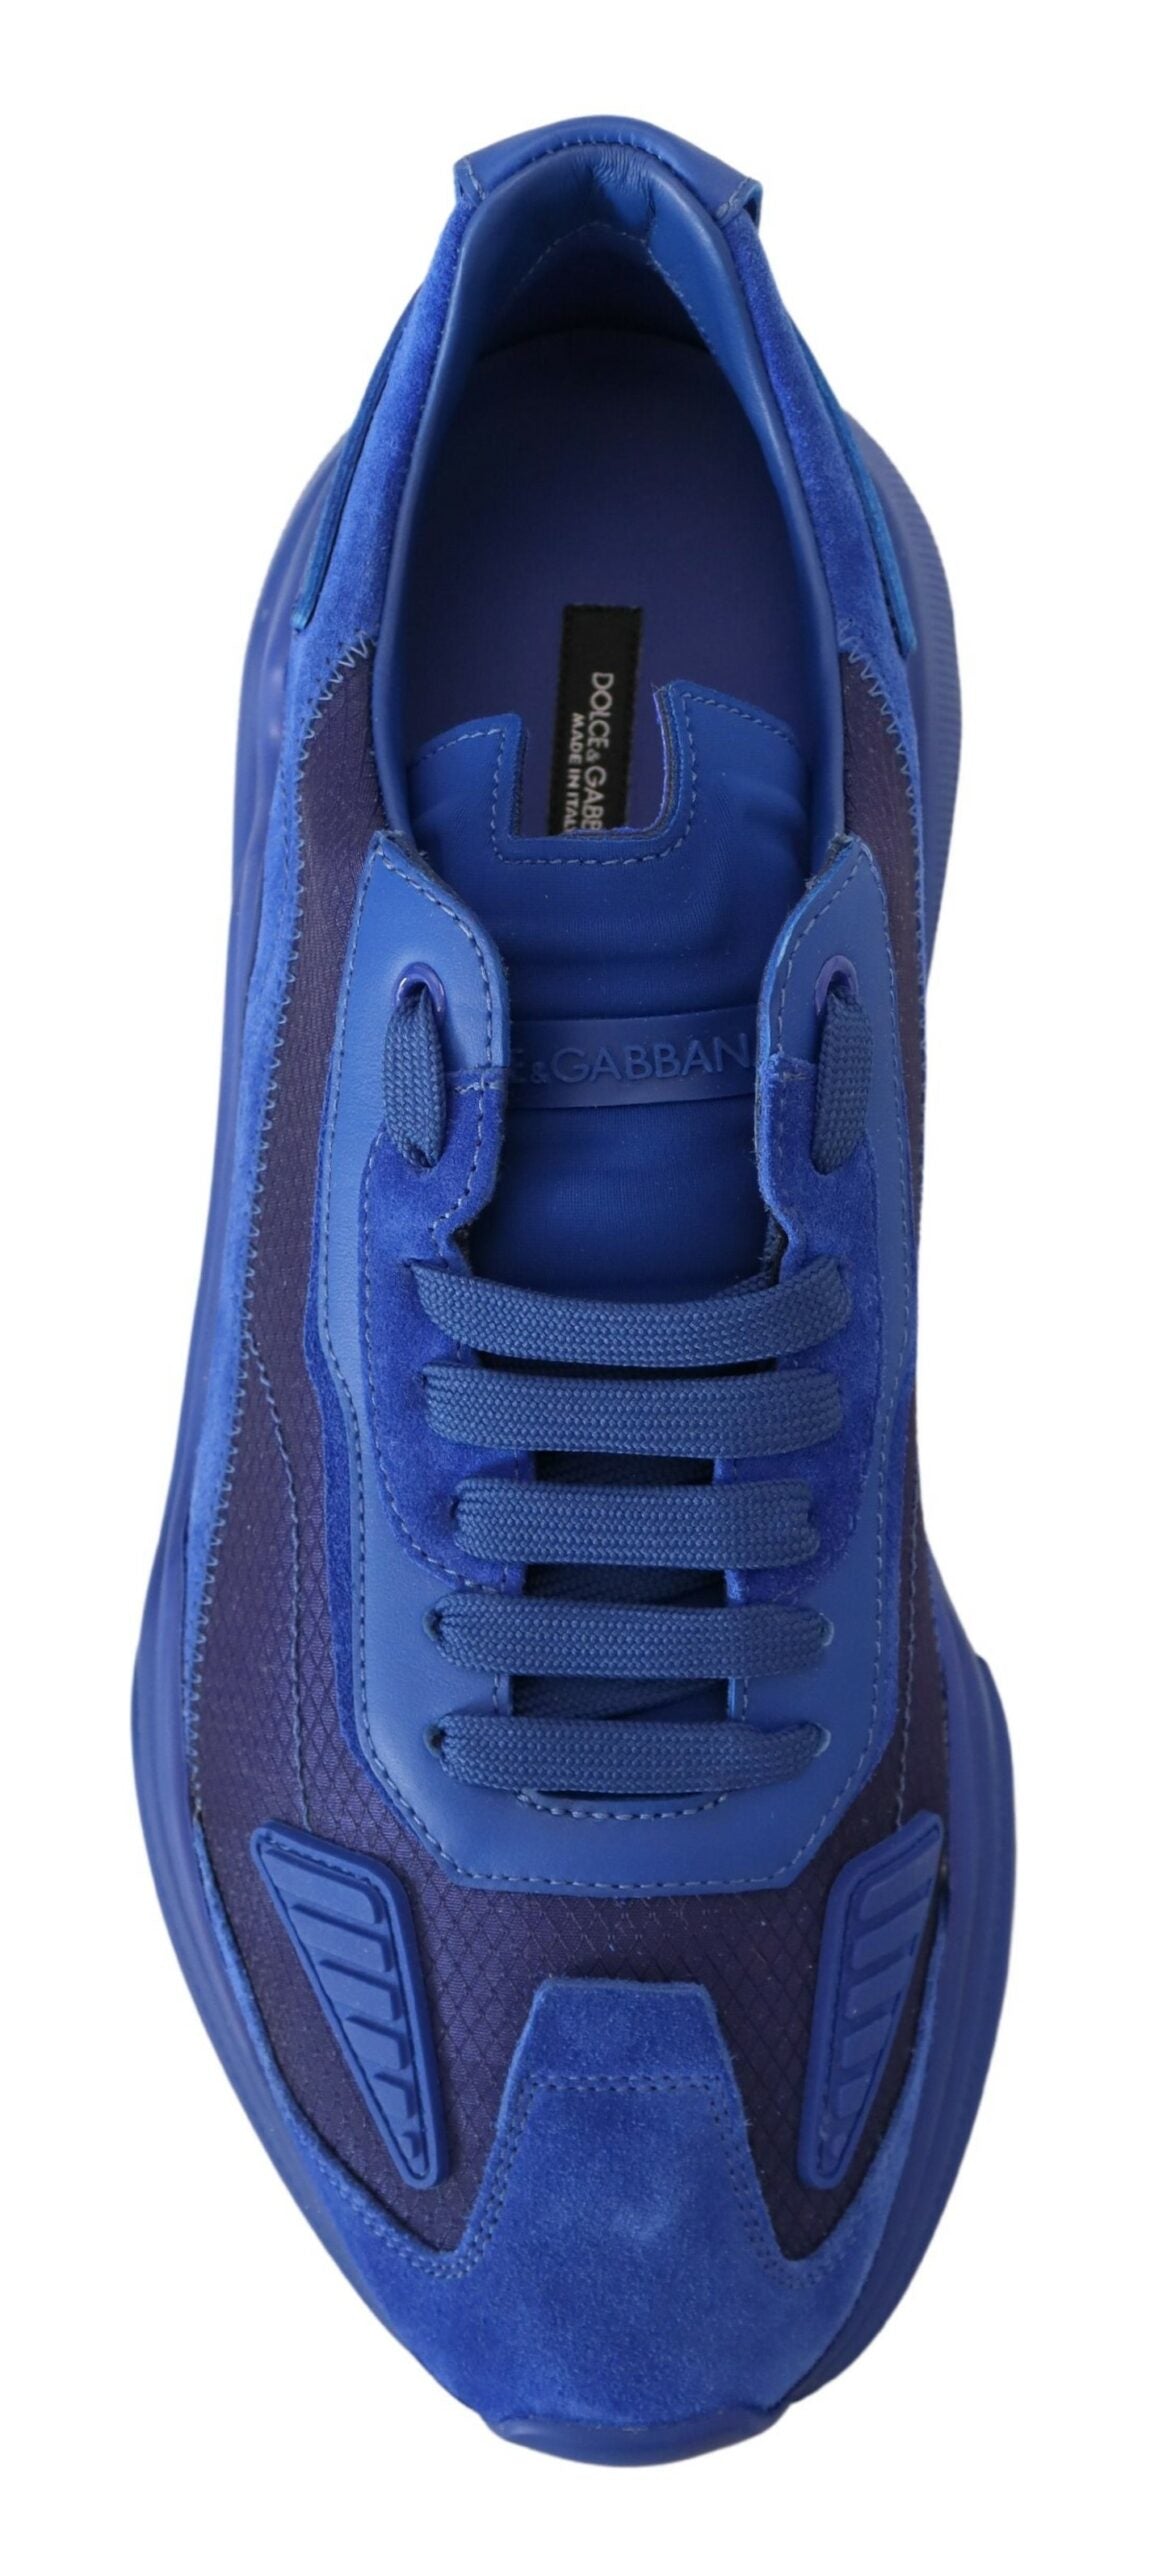 Blue Leather Sport DAYMASTER Sneakers Shoes